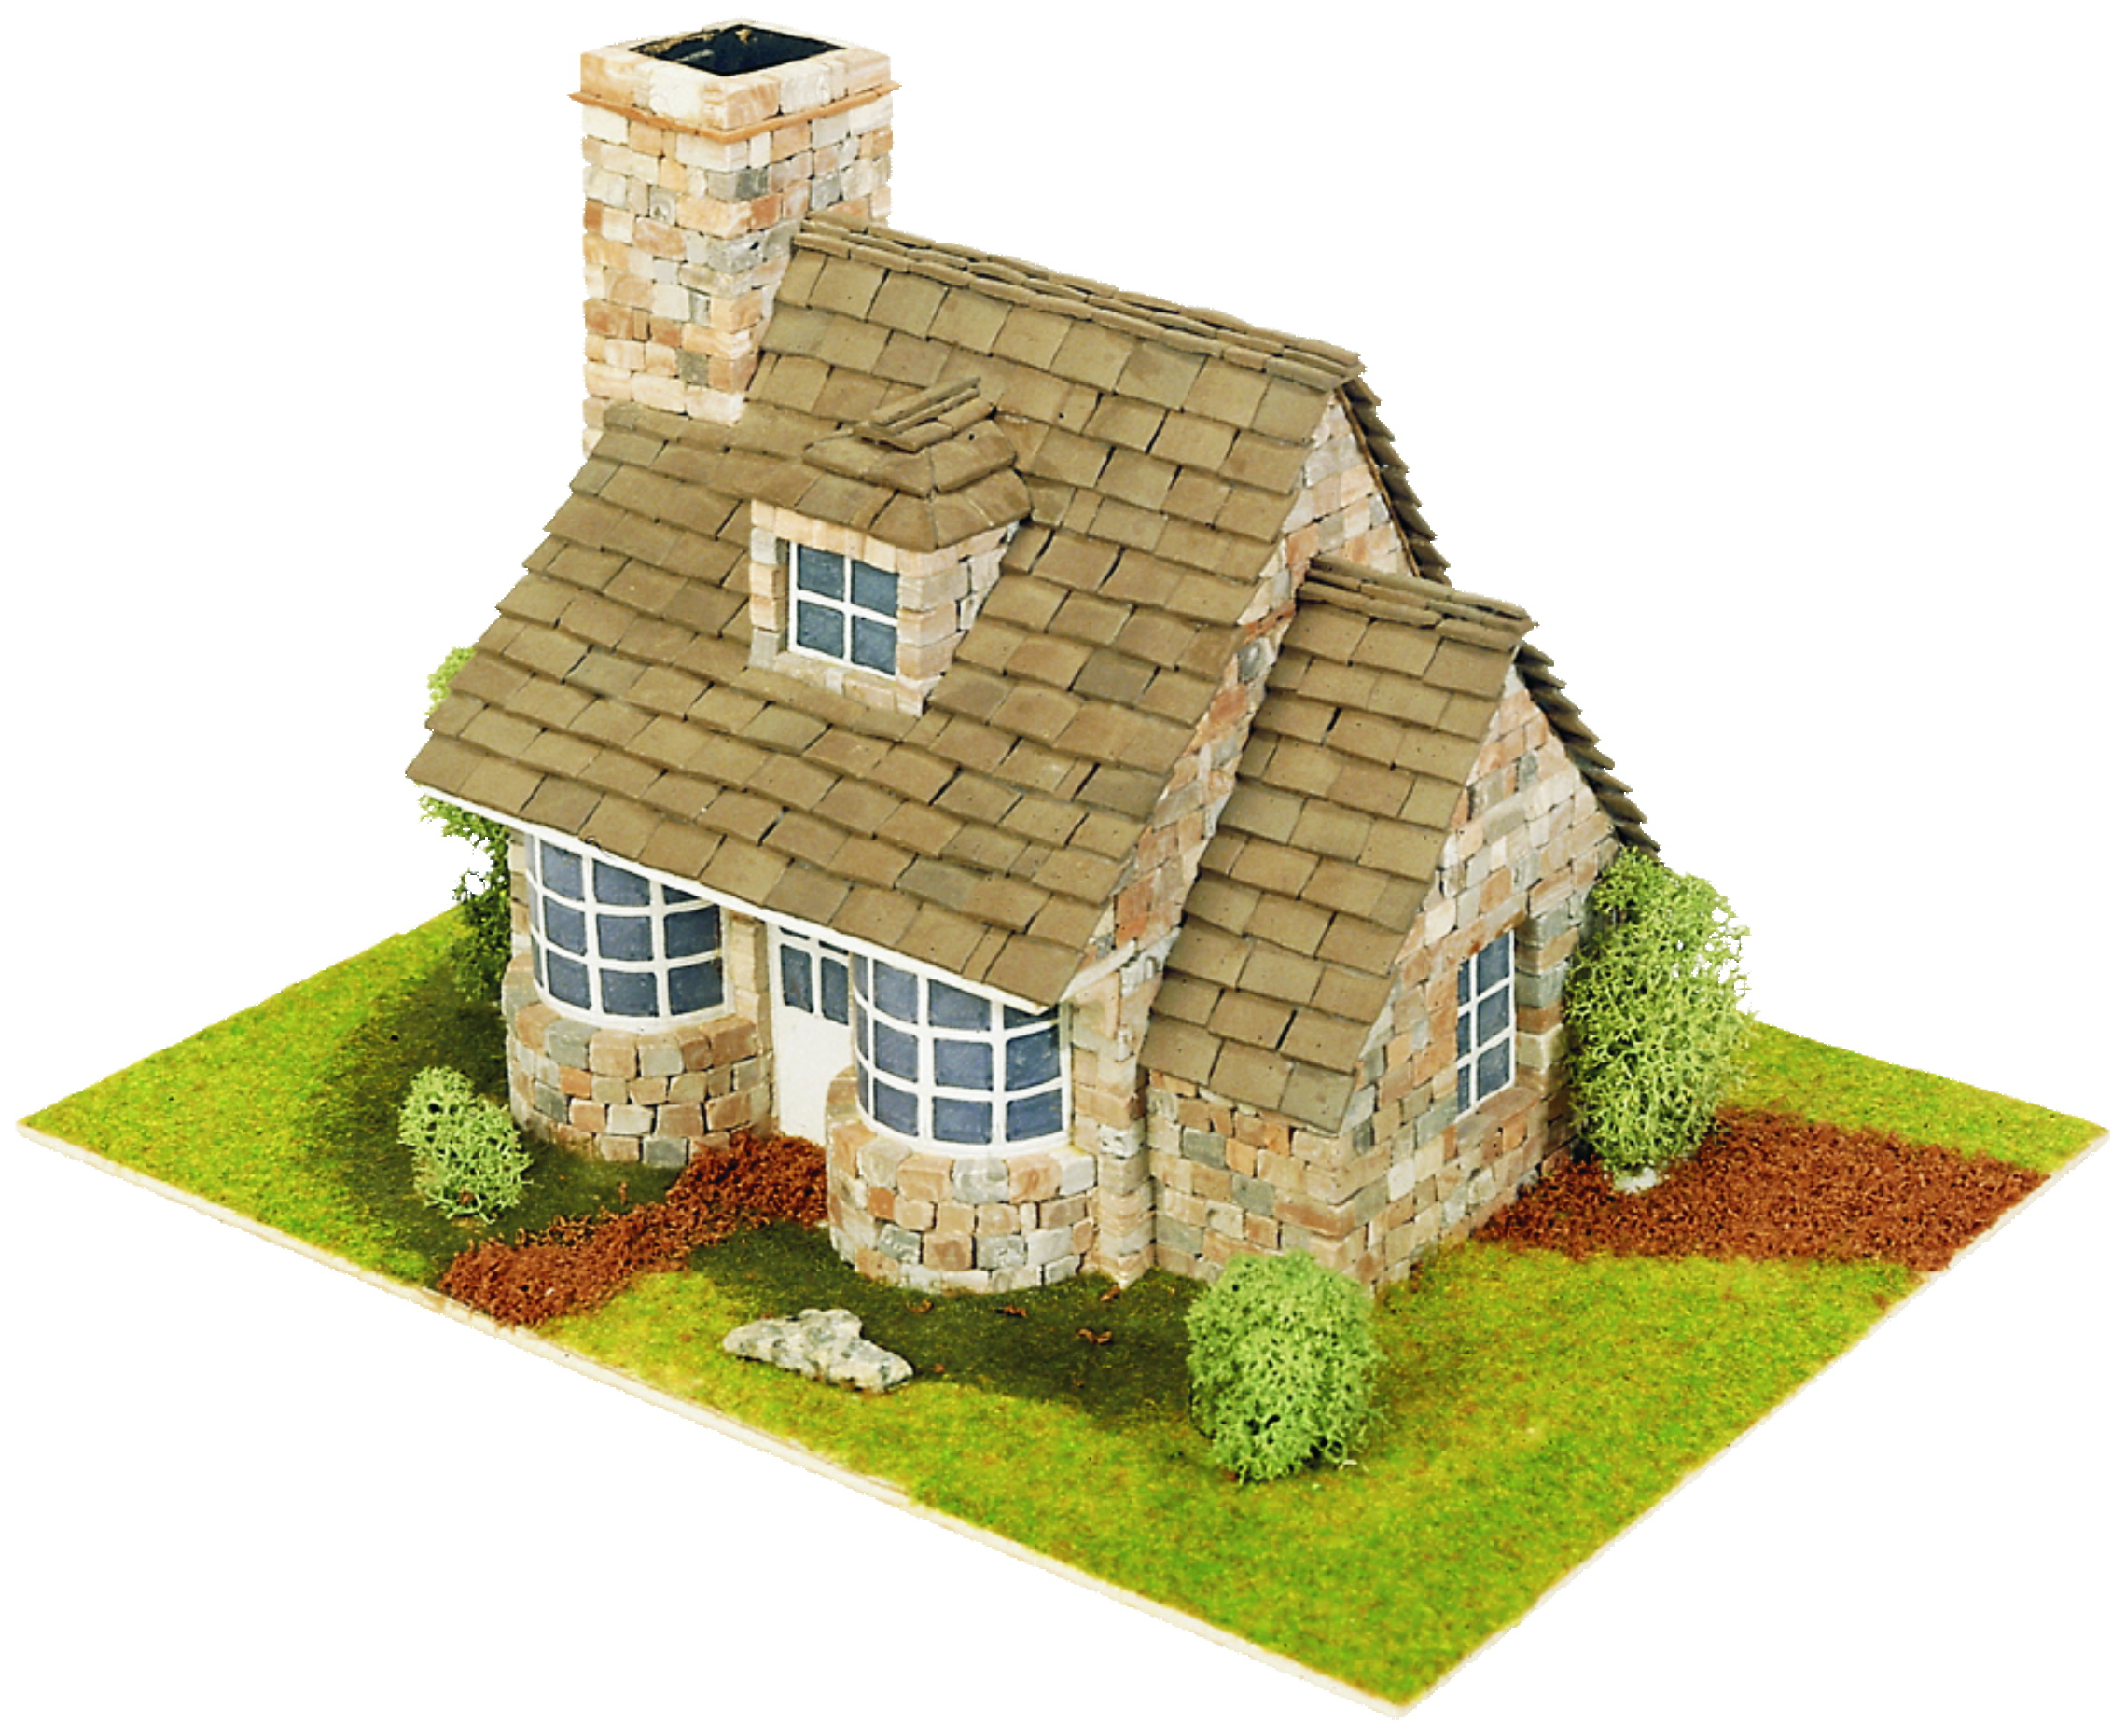 Domus-Kits 40043 - Country 3 - 1:50 - Box Of Mount